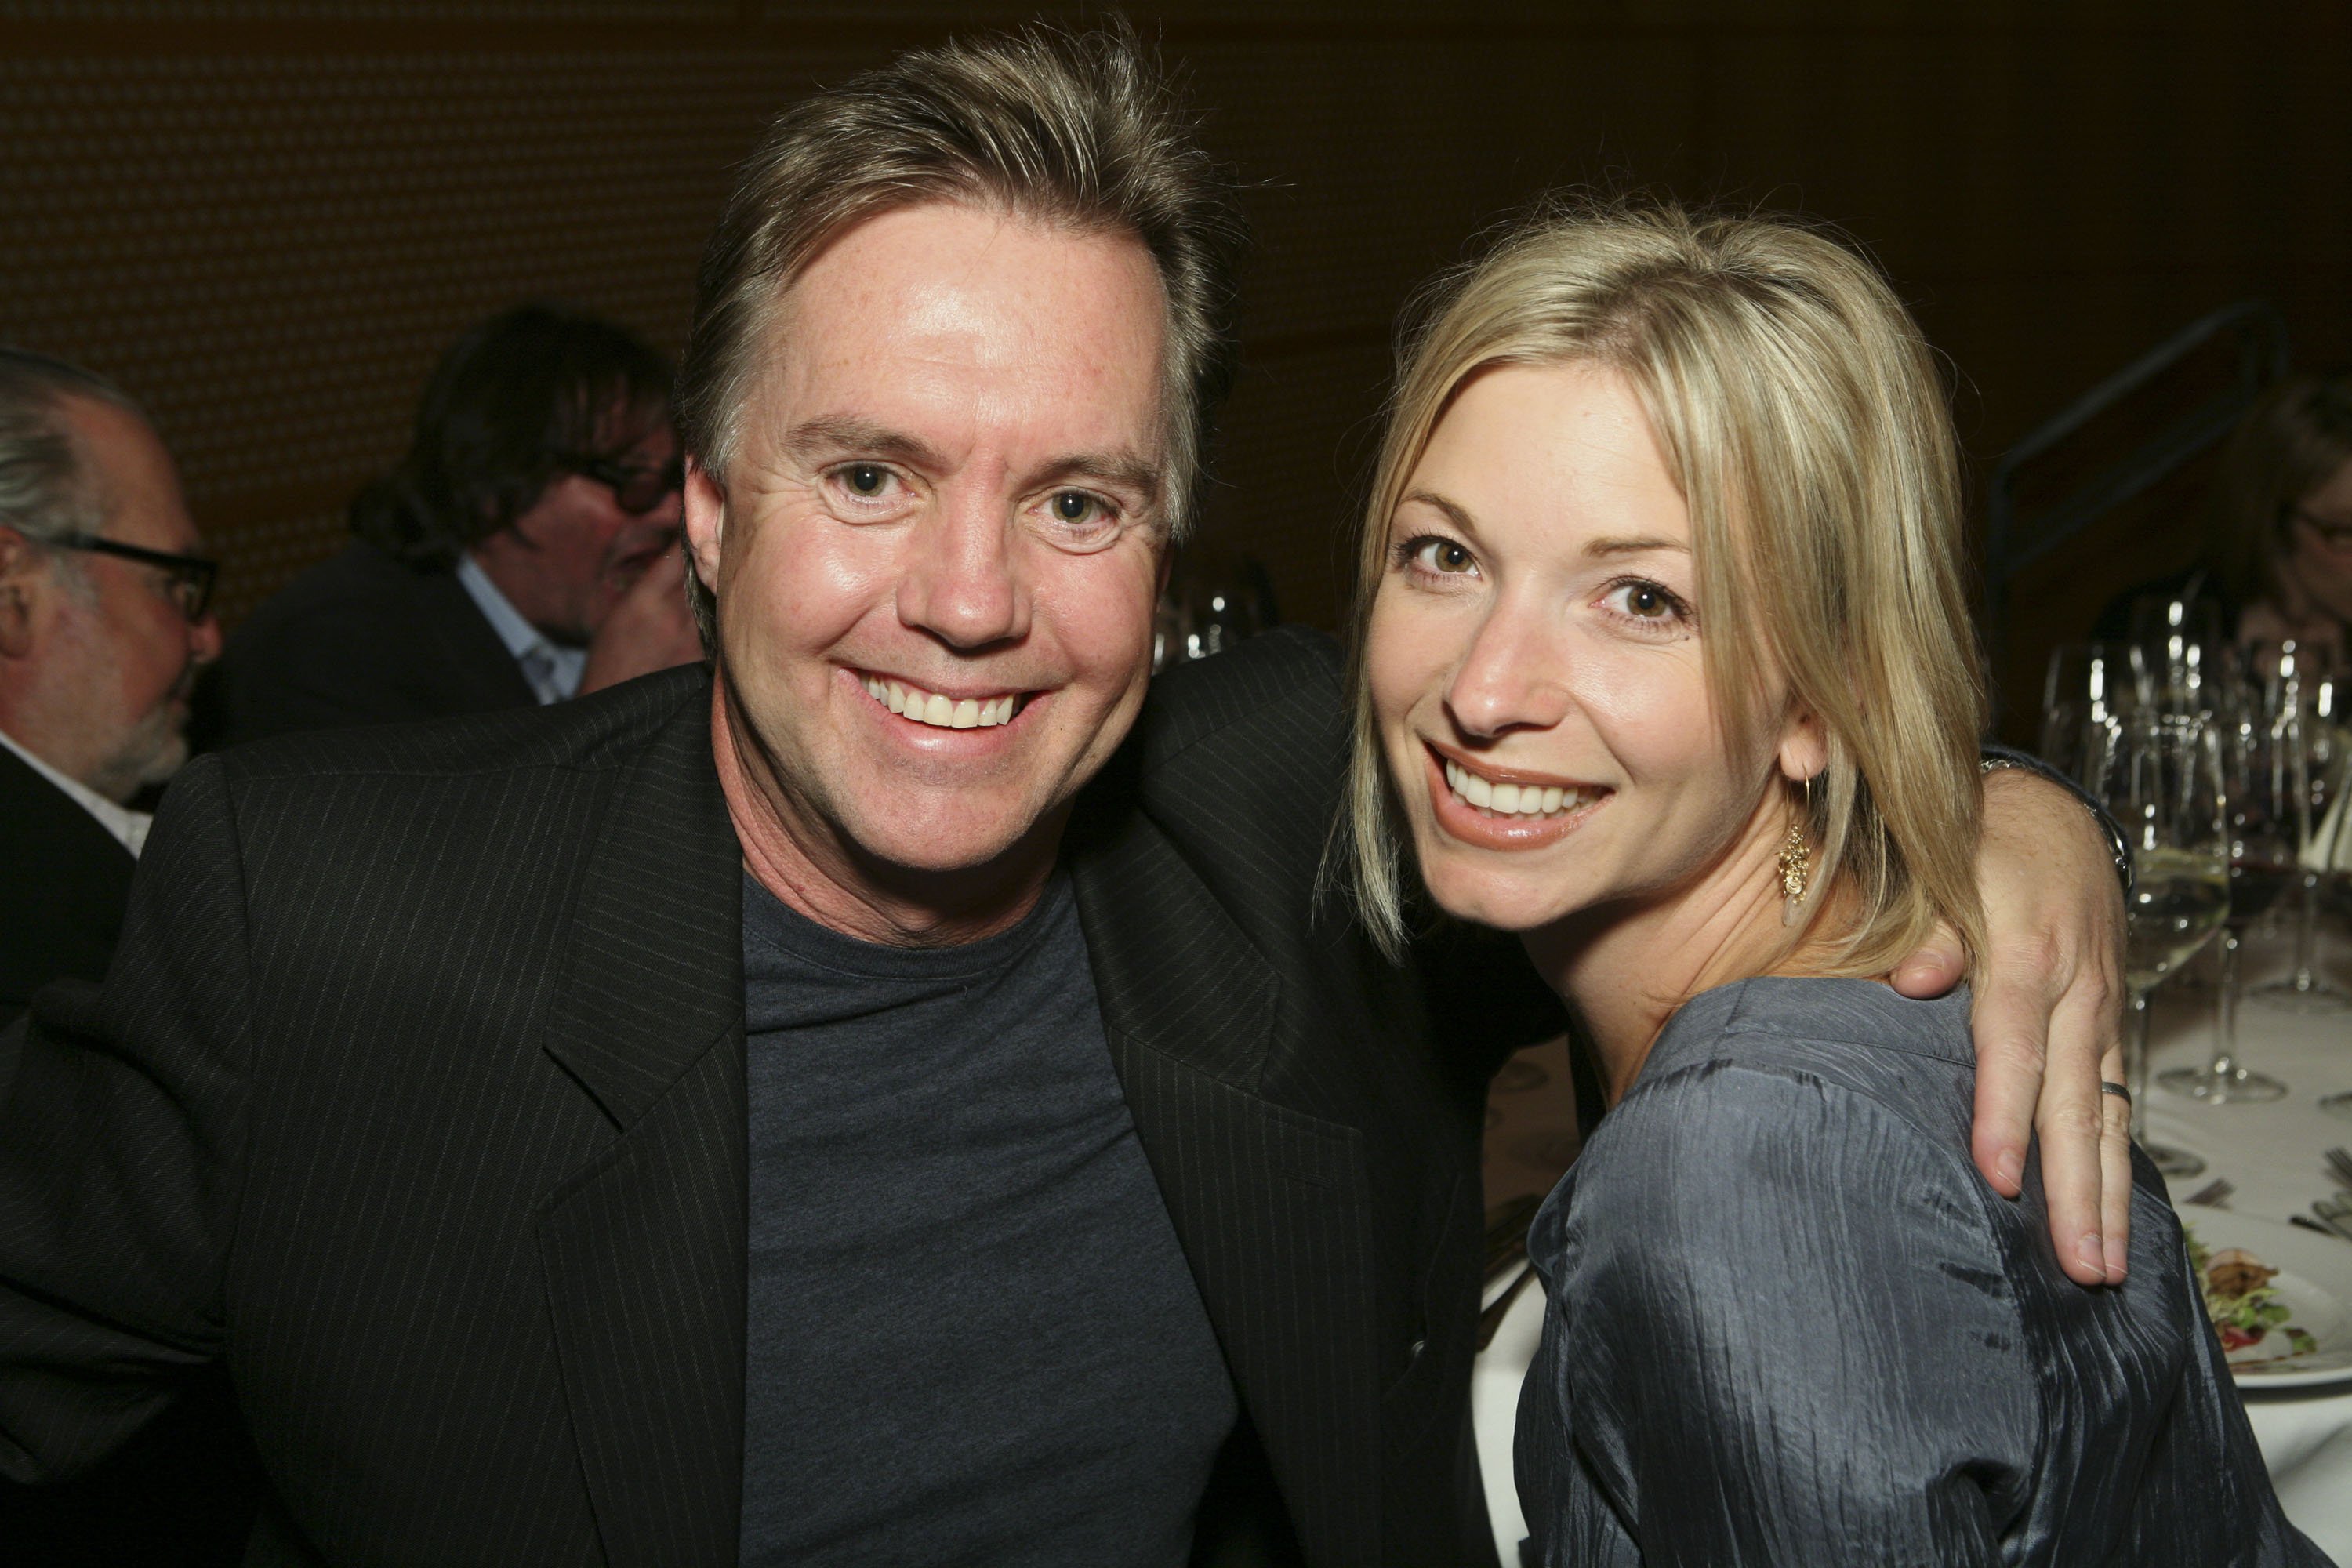 Shaun Cassidy and Tracey Lynne Turner at the Sixth Annual Wine Aficionado Dinner "Dial M for Merlot" on May 8, 2008, in Los Angeles, California | Source: Getty Images